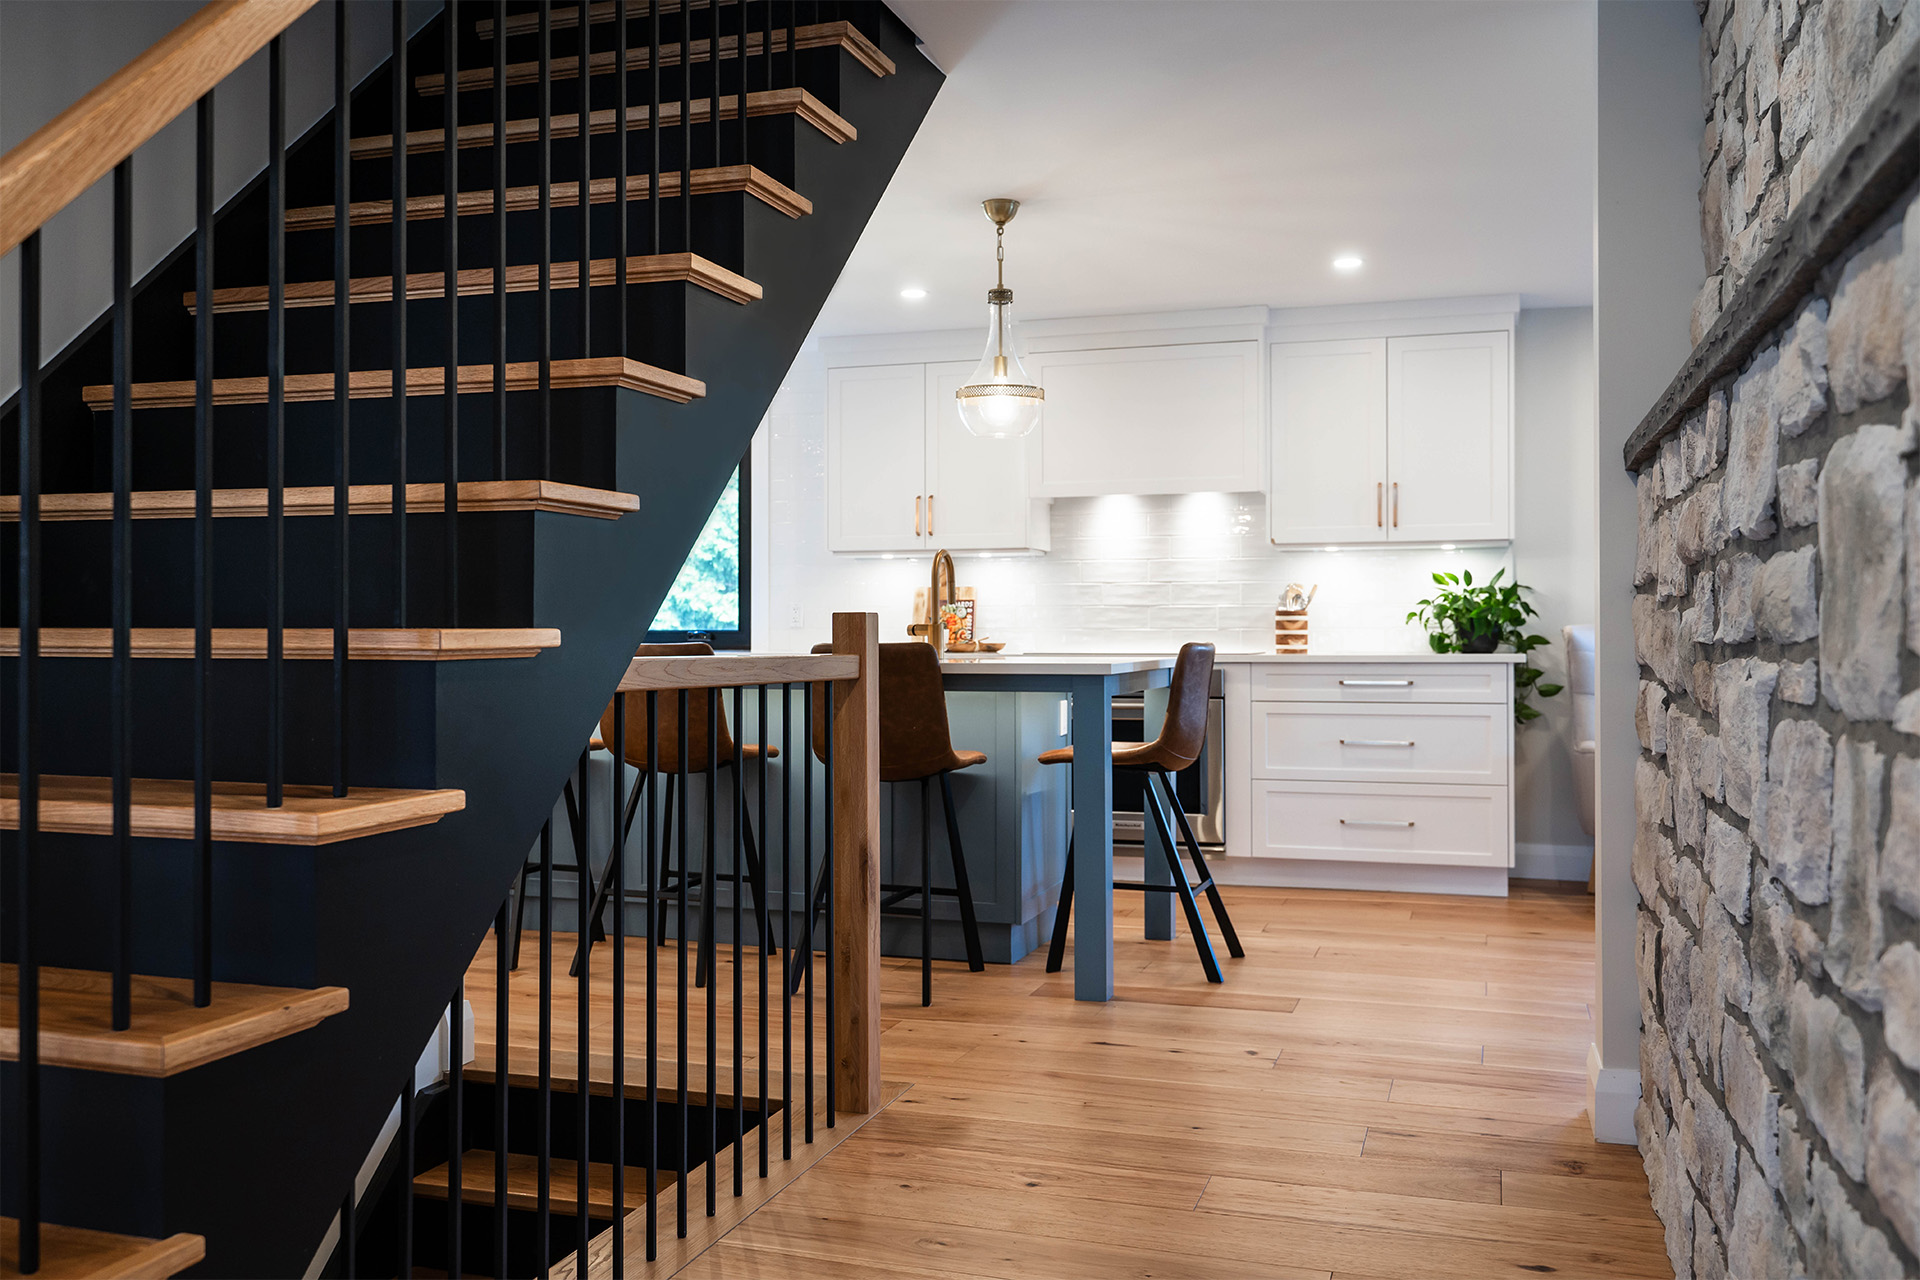 A modern kitchen with white cabinetry and a stone accent wall beside a black staircase with wooden steps